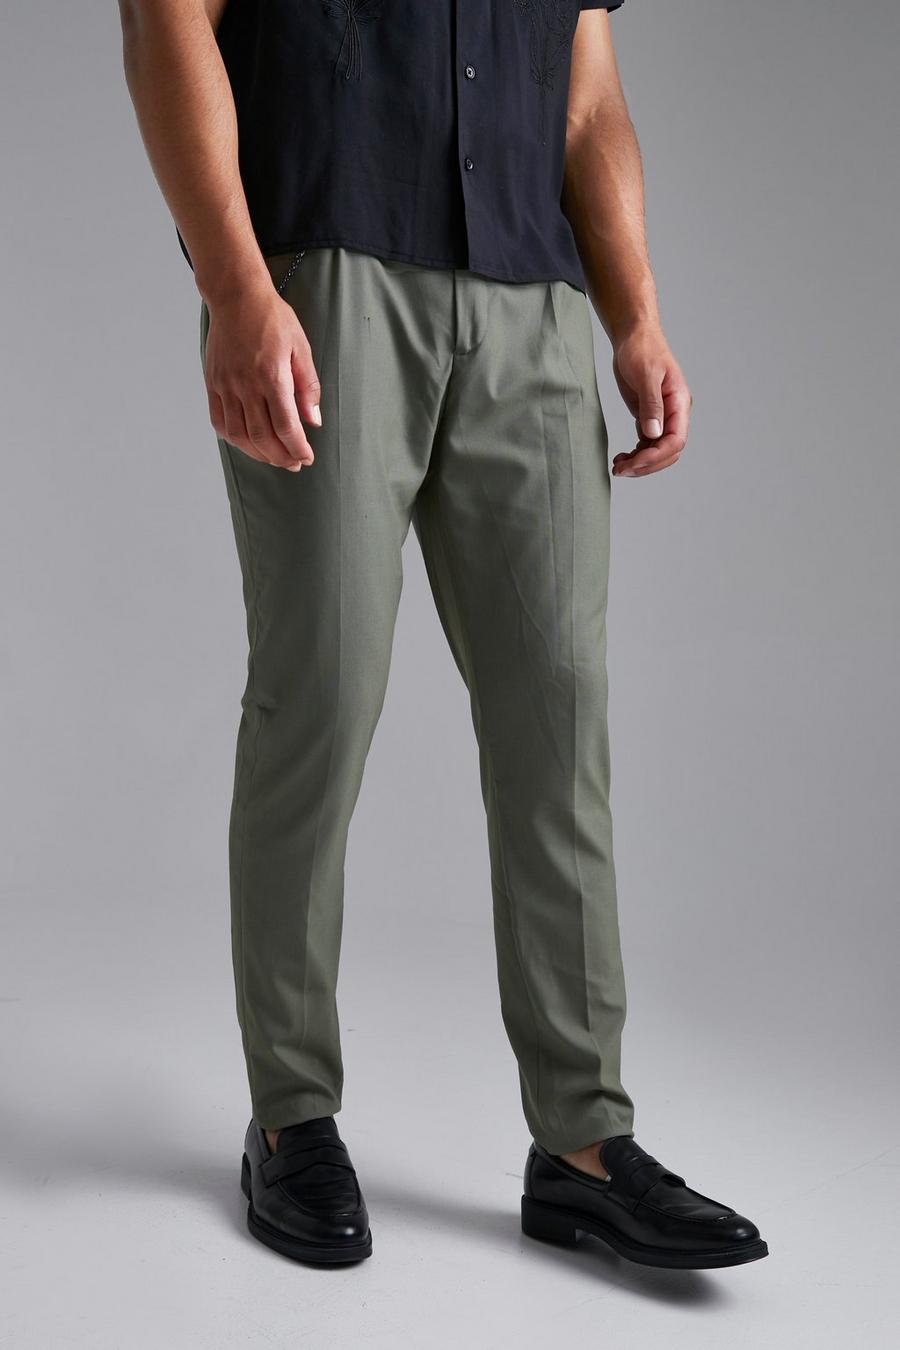 Sage green Tall Tapered Smart Plain Trouser With Chain